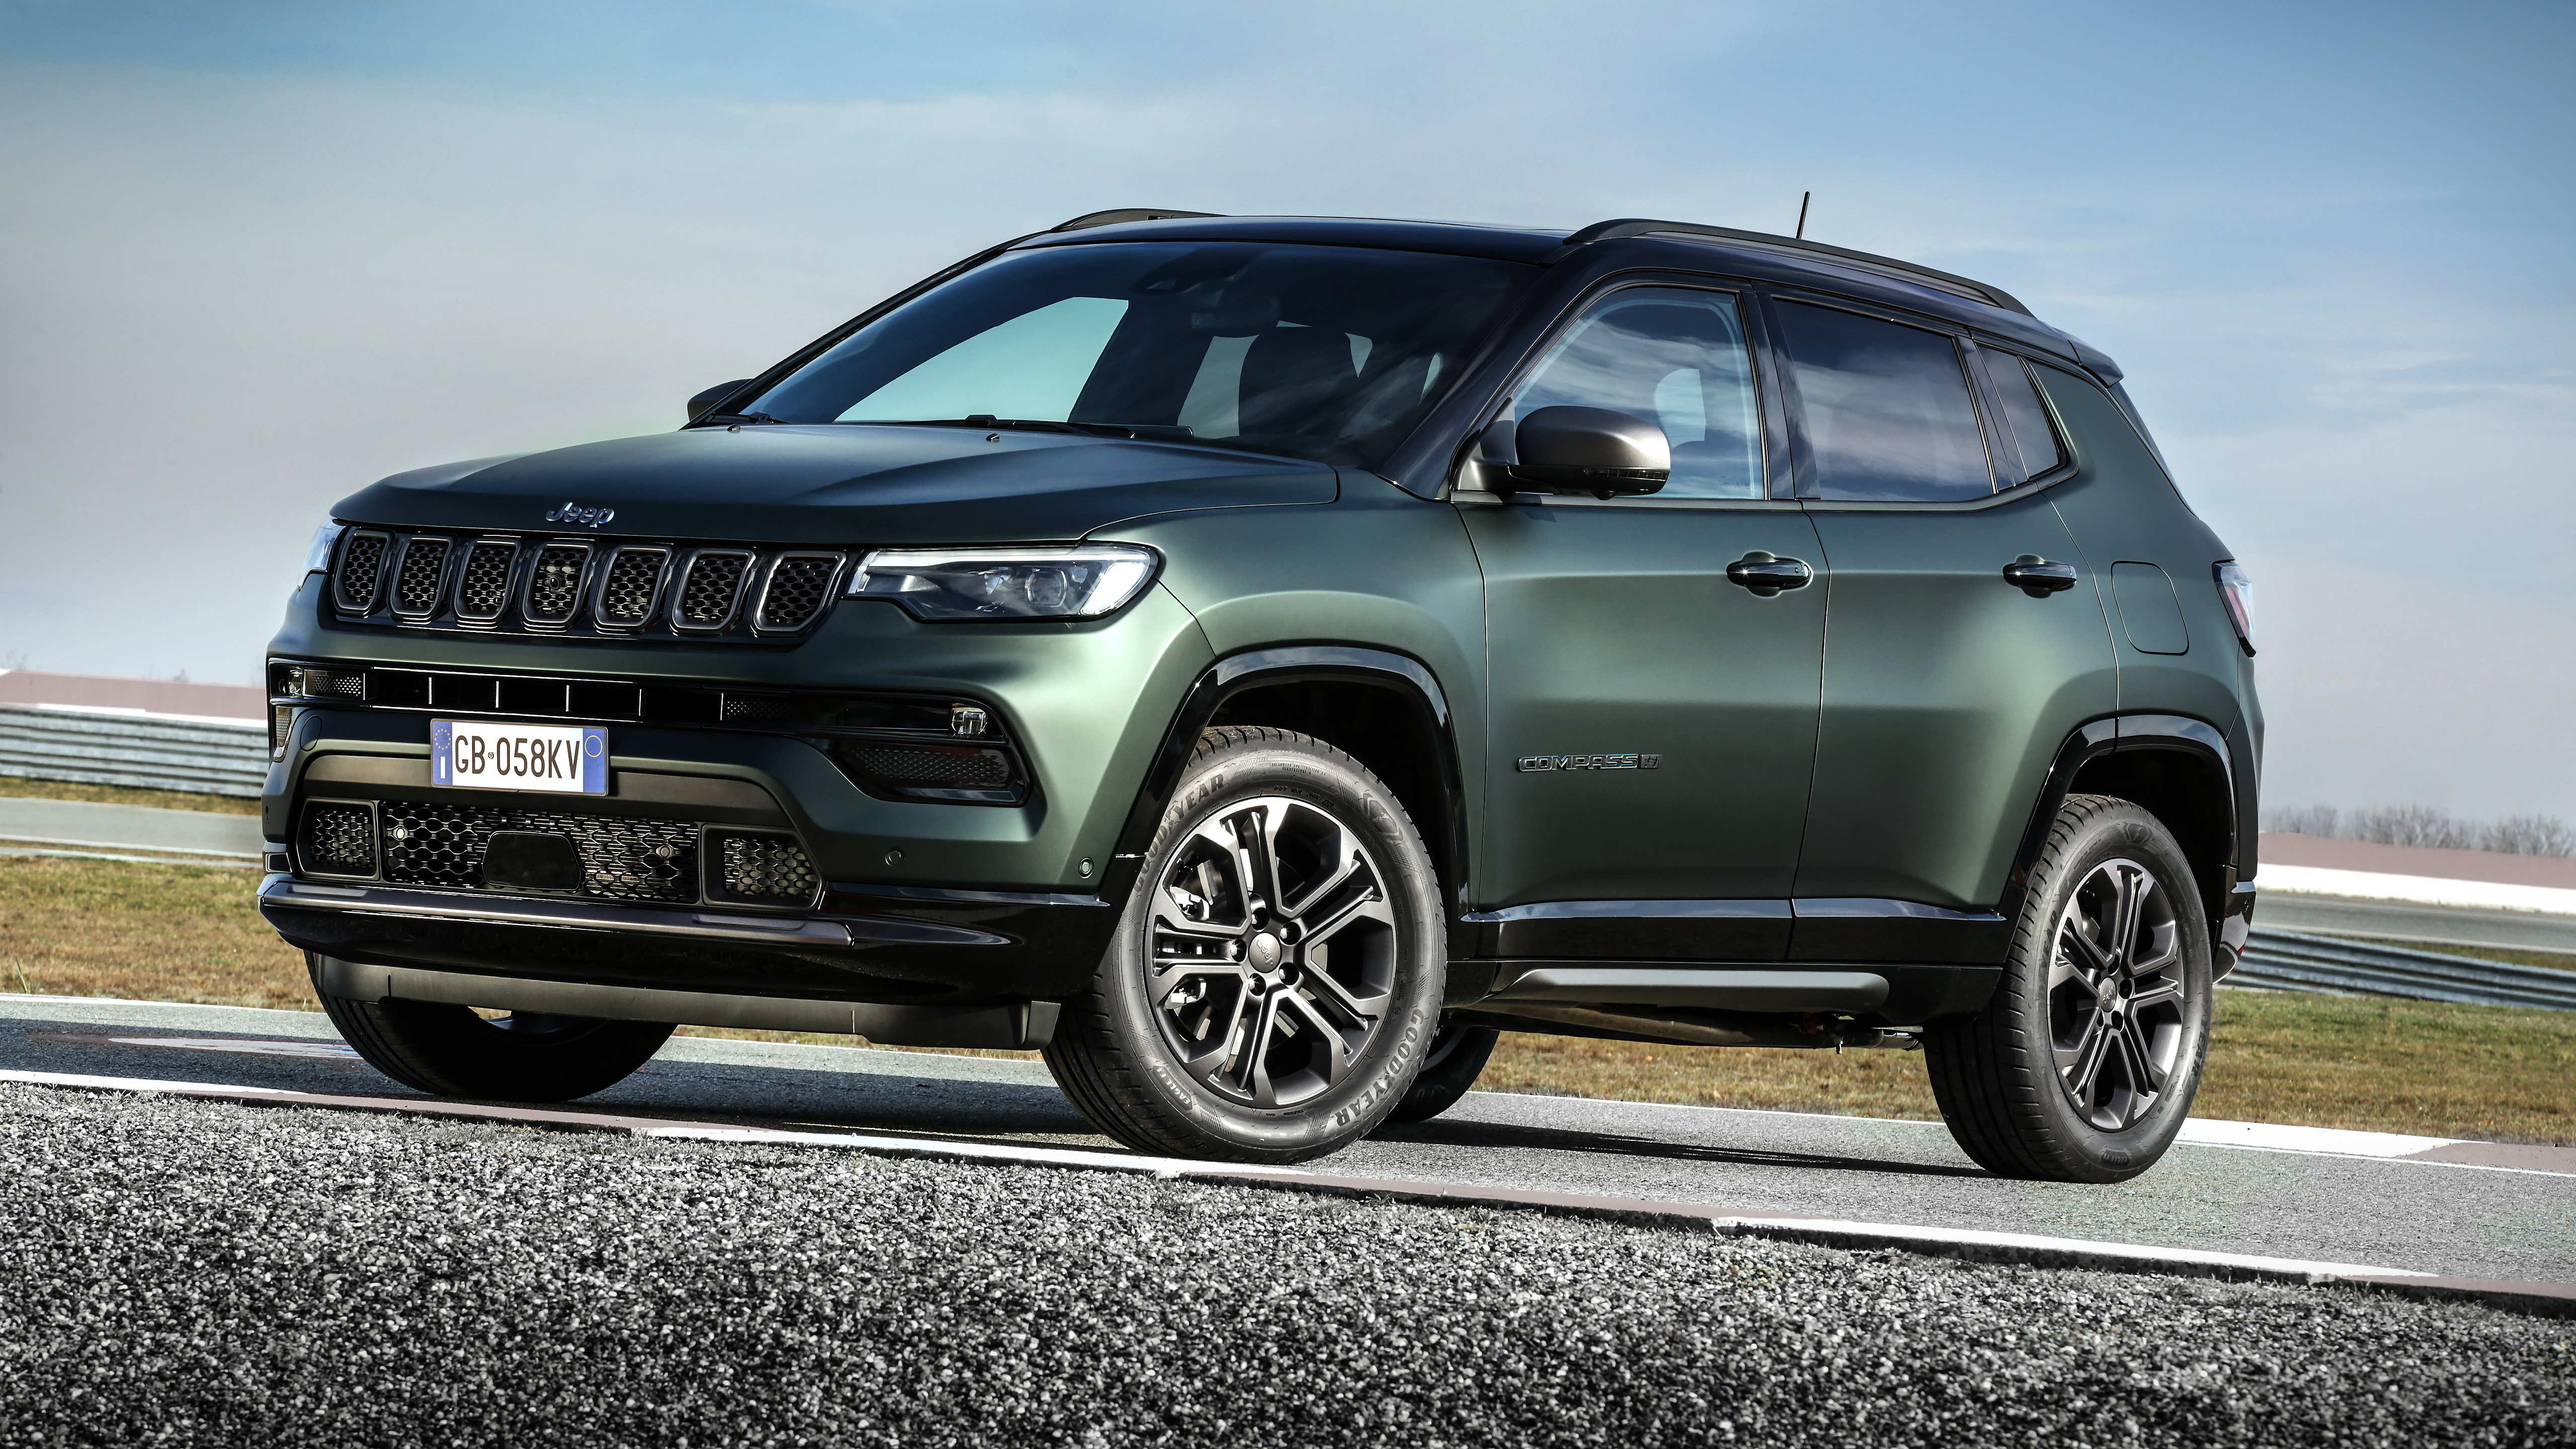 Silver 2022 Jeep Compass Wallpapers